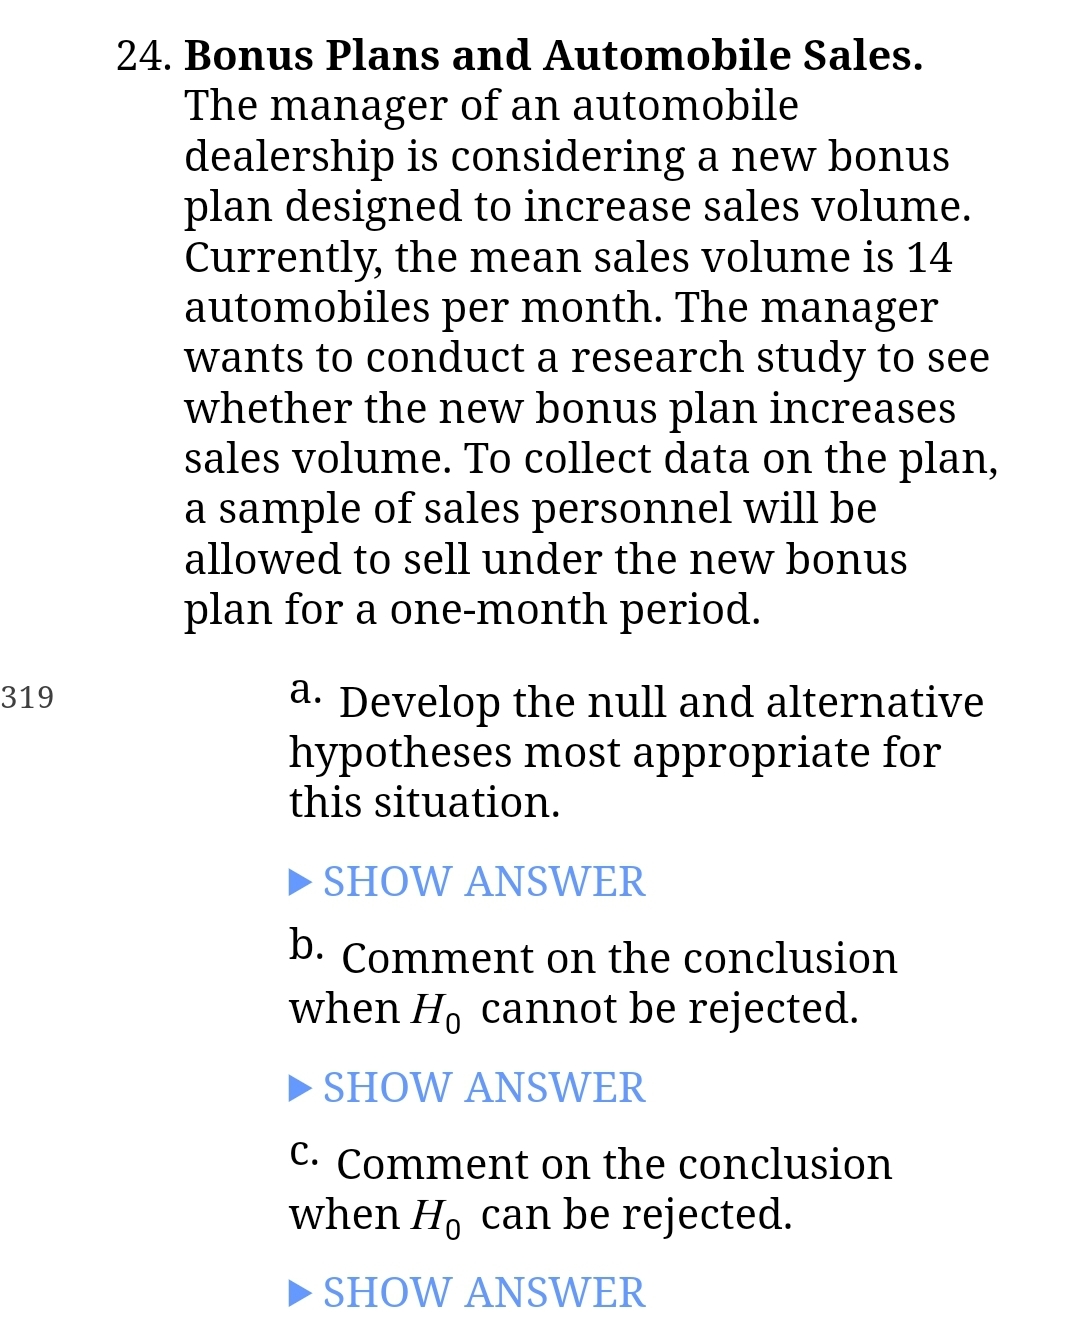 319
24. Bonus Plans and Automobile Sales.
The manager of an automobile
dealership is considering a new bonus
plan designed to increase sales volume.
Currently, the mean sales volume is 14.
automobiles per month. The manager
wants to conduct a research study to see
whether the new bonus plan increases
sales volume. To collect data on the plan,
a sample of sales personnel will be
allowed to sell under the new bonus
plan for a one-month period.
a. Develop the null and alternative
hypotheses most appropriate for
this situation.
SHOW ANSWER
b. Comment on the conclusion
when Ho cannot be rejected.
►SHOW ANSWER
C. Comment on the conclusion
when Ho can be rejected.
SHOW ANSWER